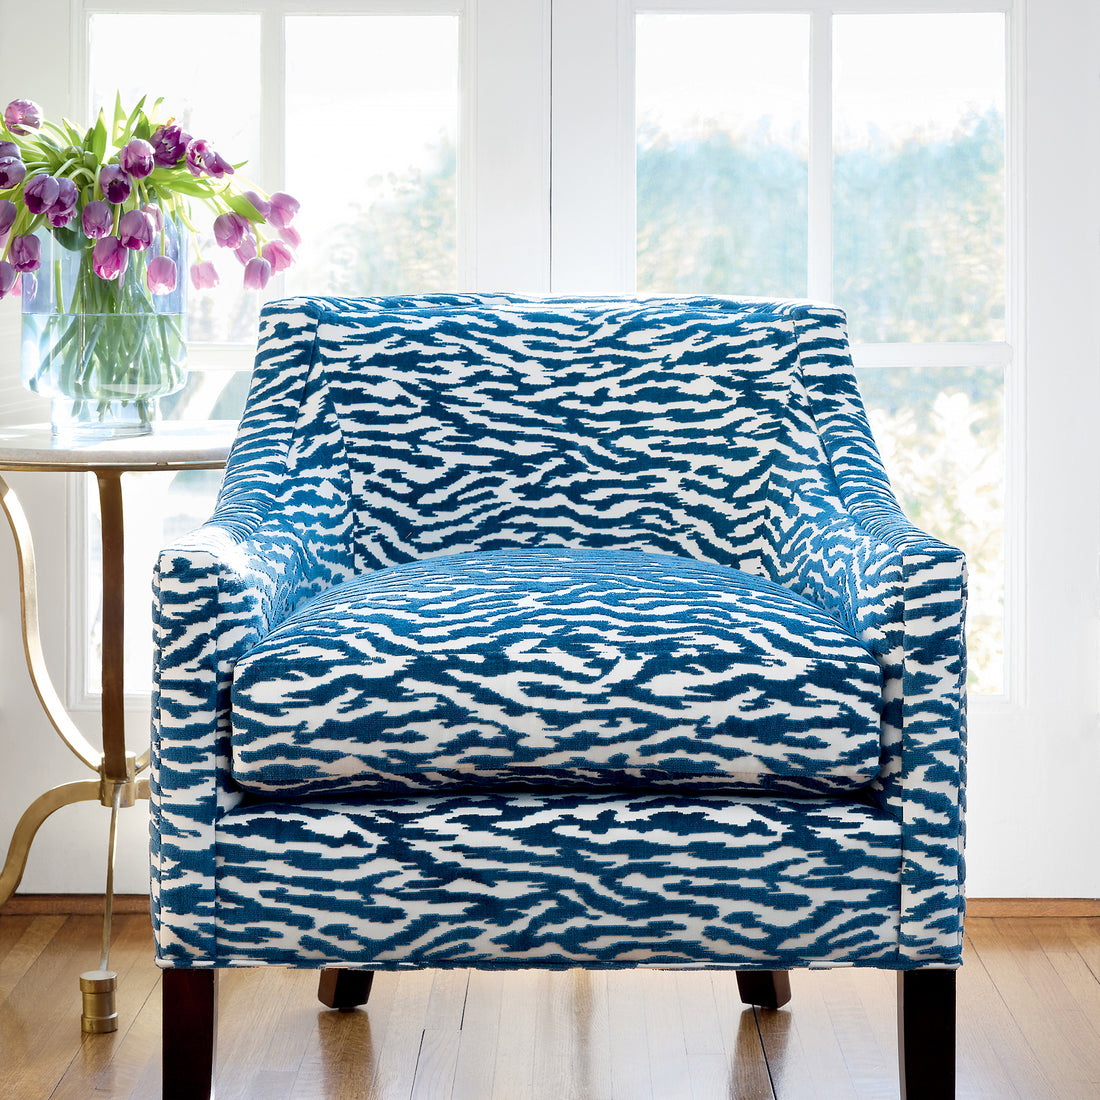 Everett Chair in Tadoba Velvet in Navy - pattern number AW24527 - by Anna French in the Devon collection